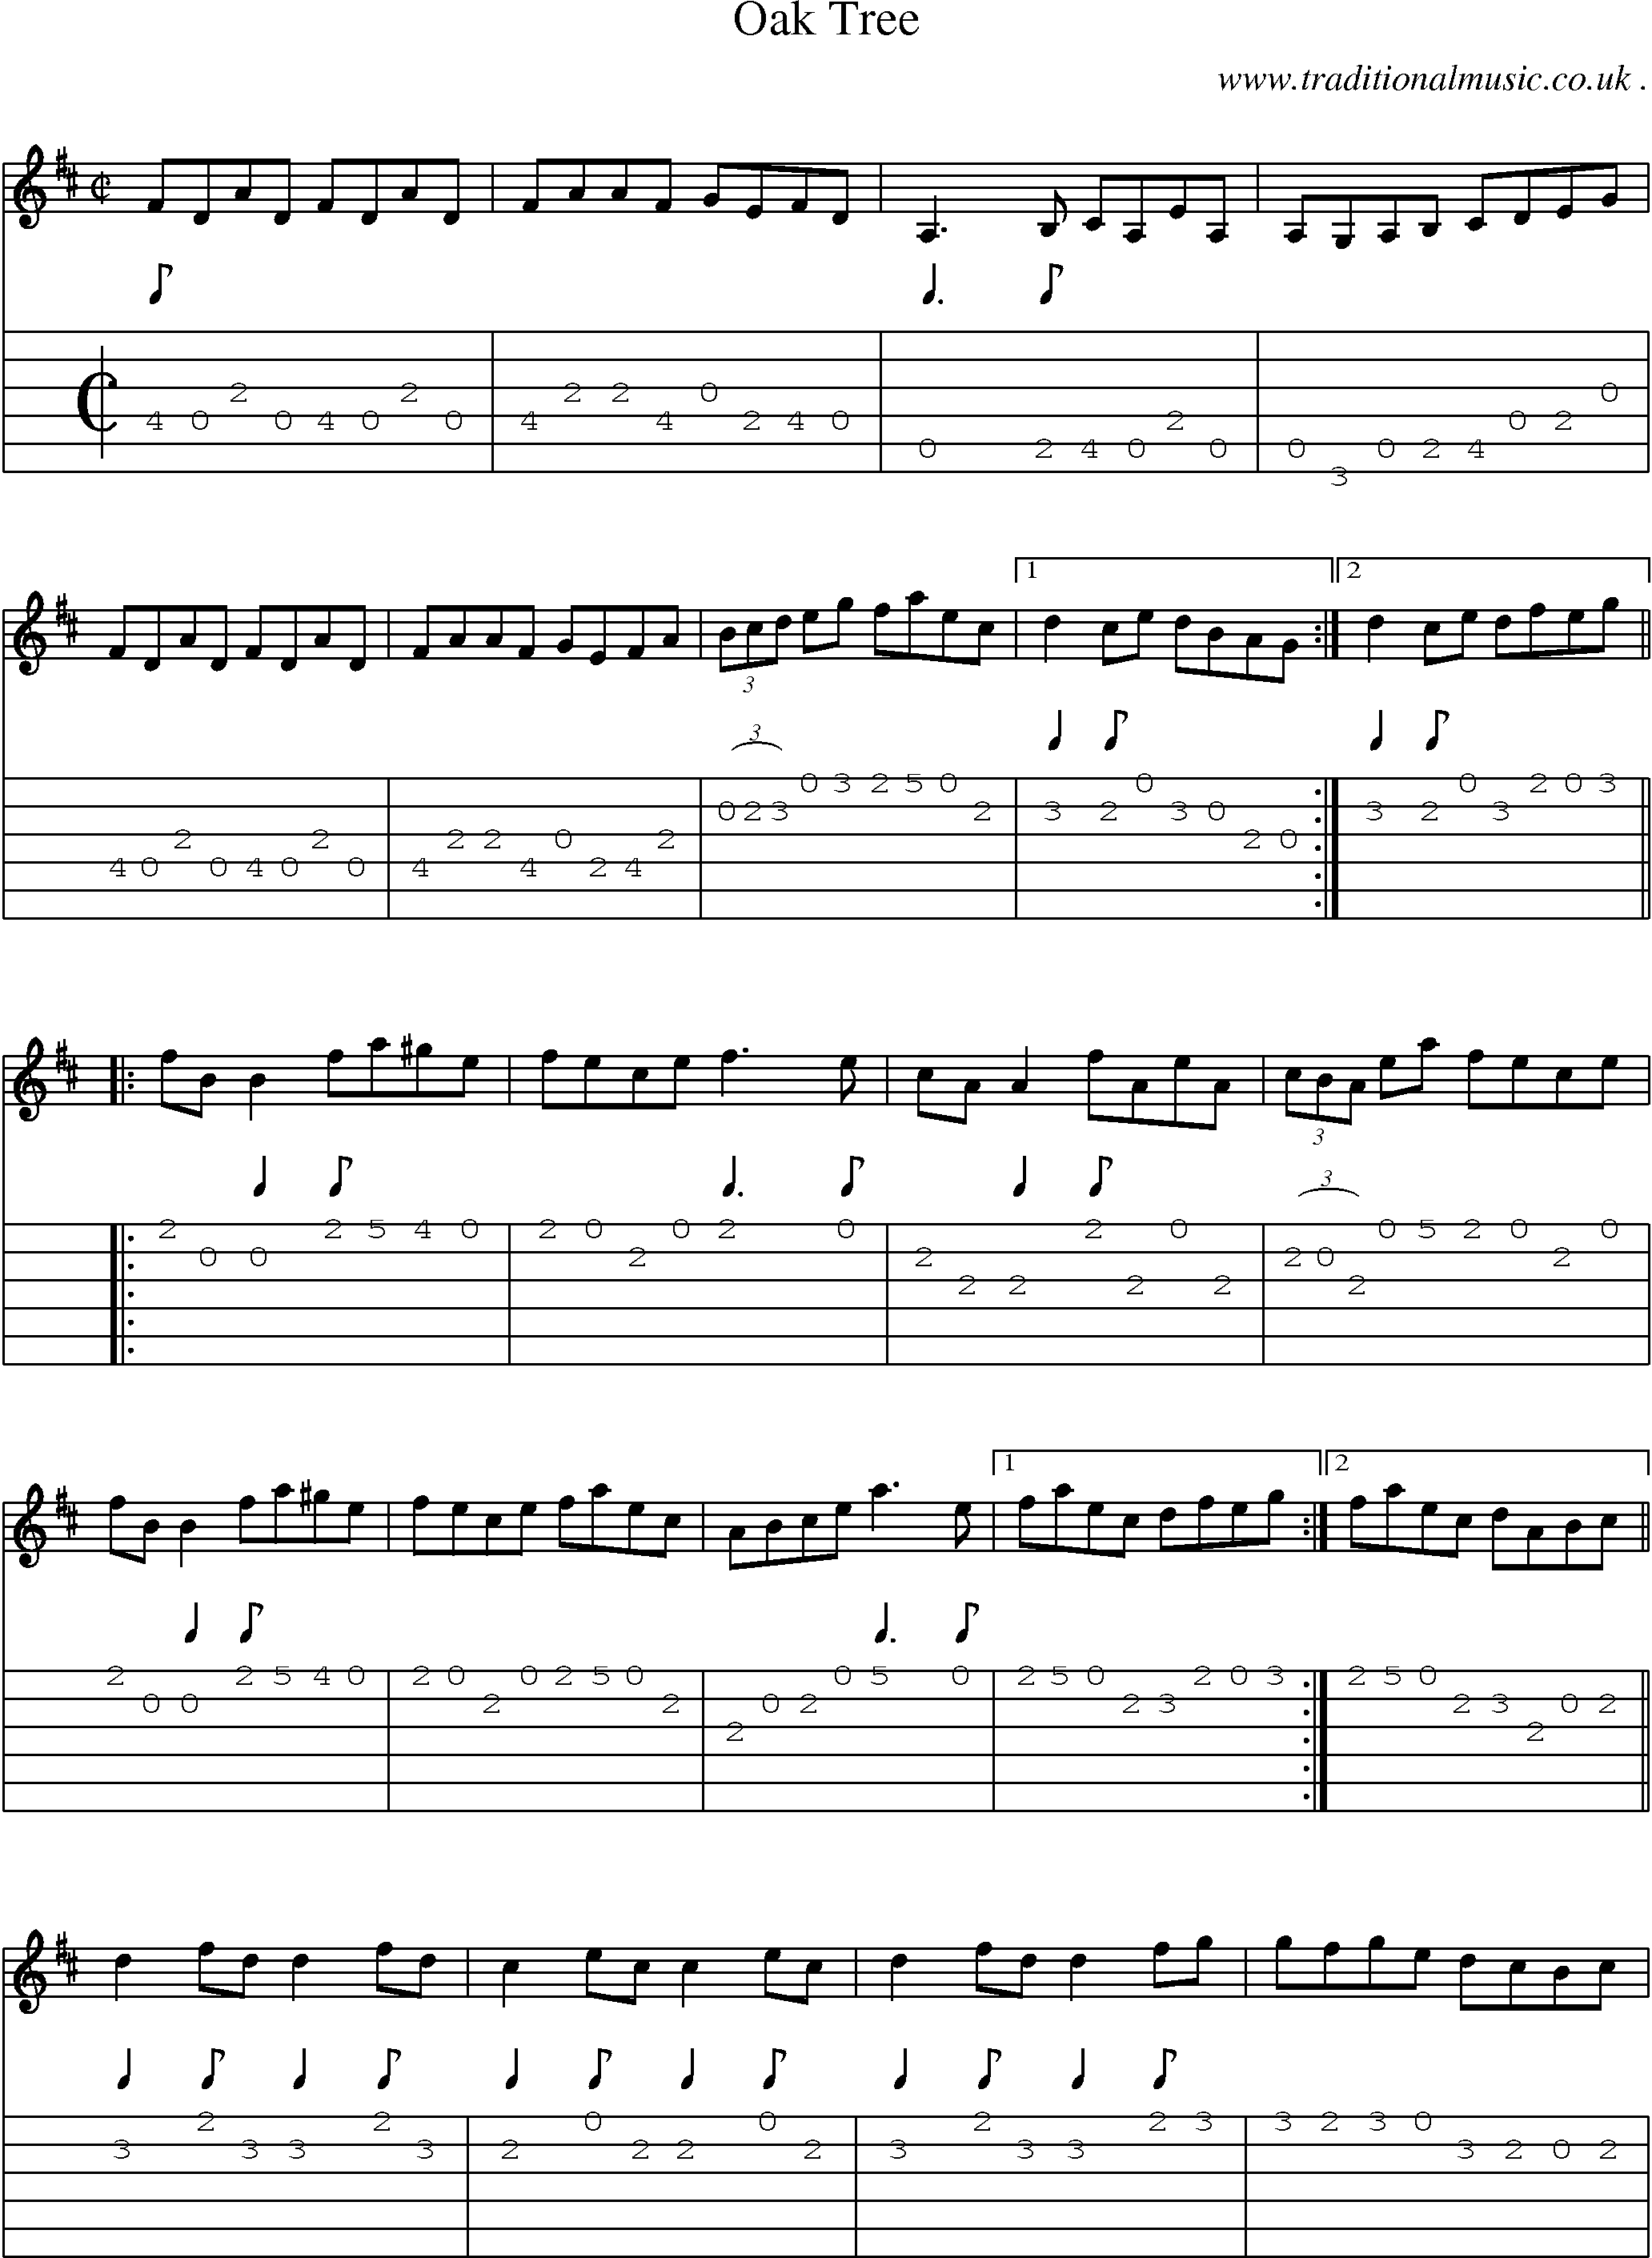 Sheet-Music and Guitar Tabs for Oak Tree